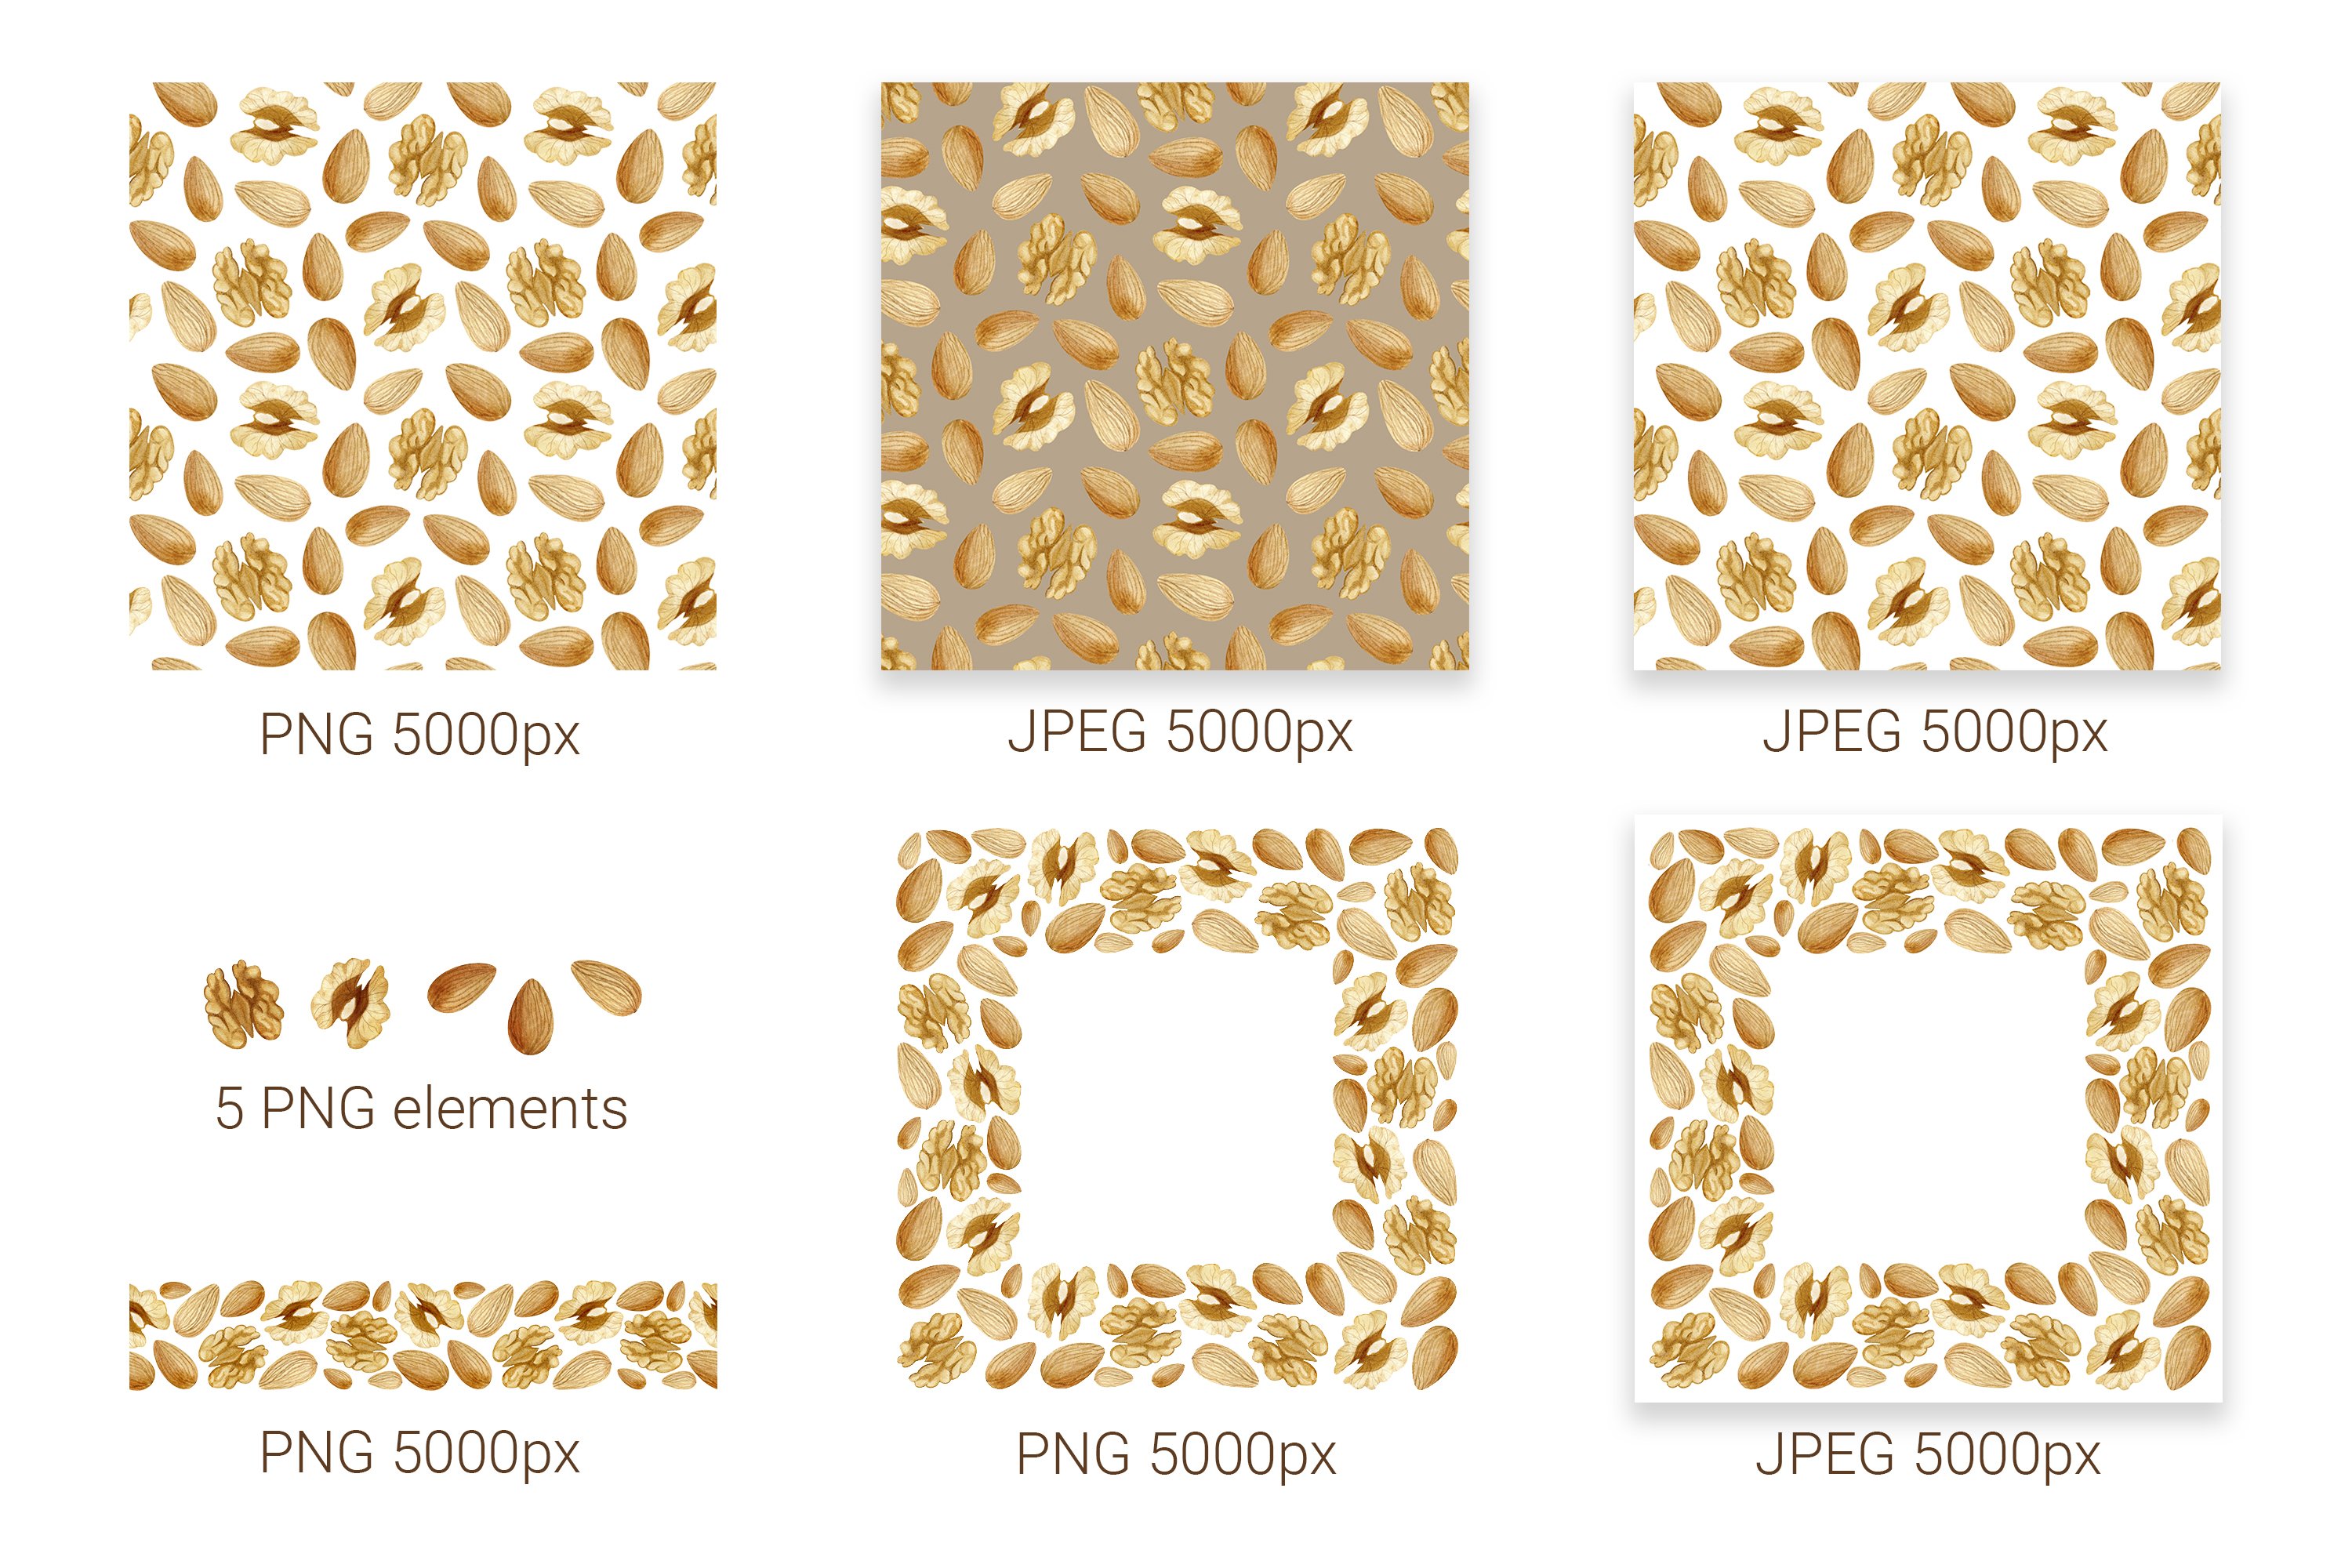 Diverse of nuts patterns and frames.